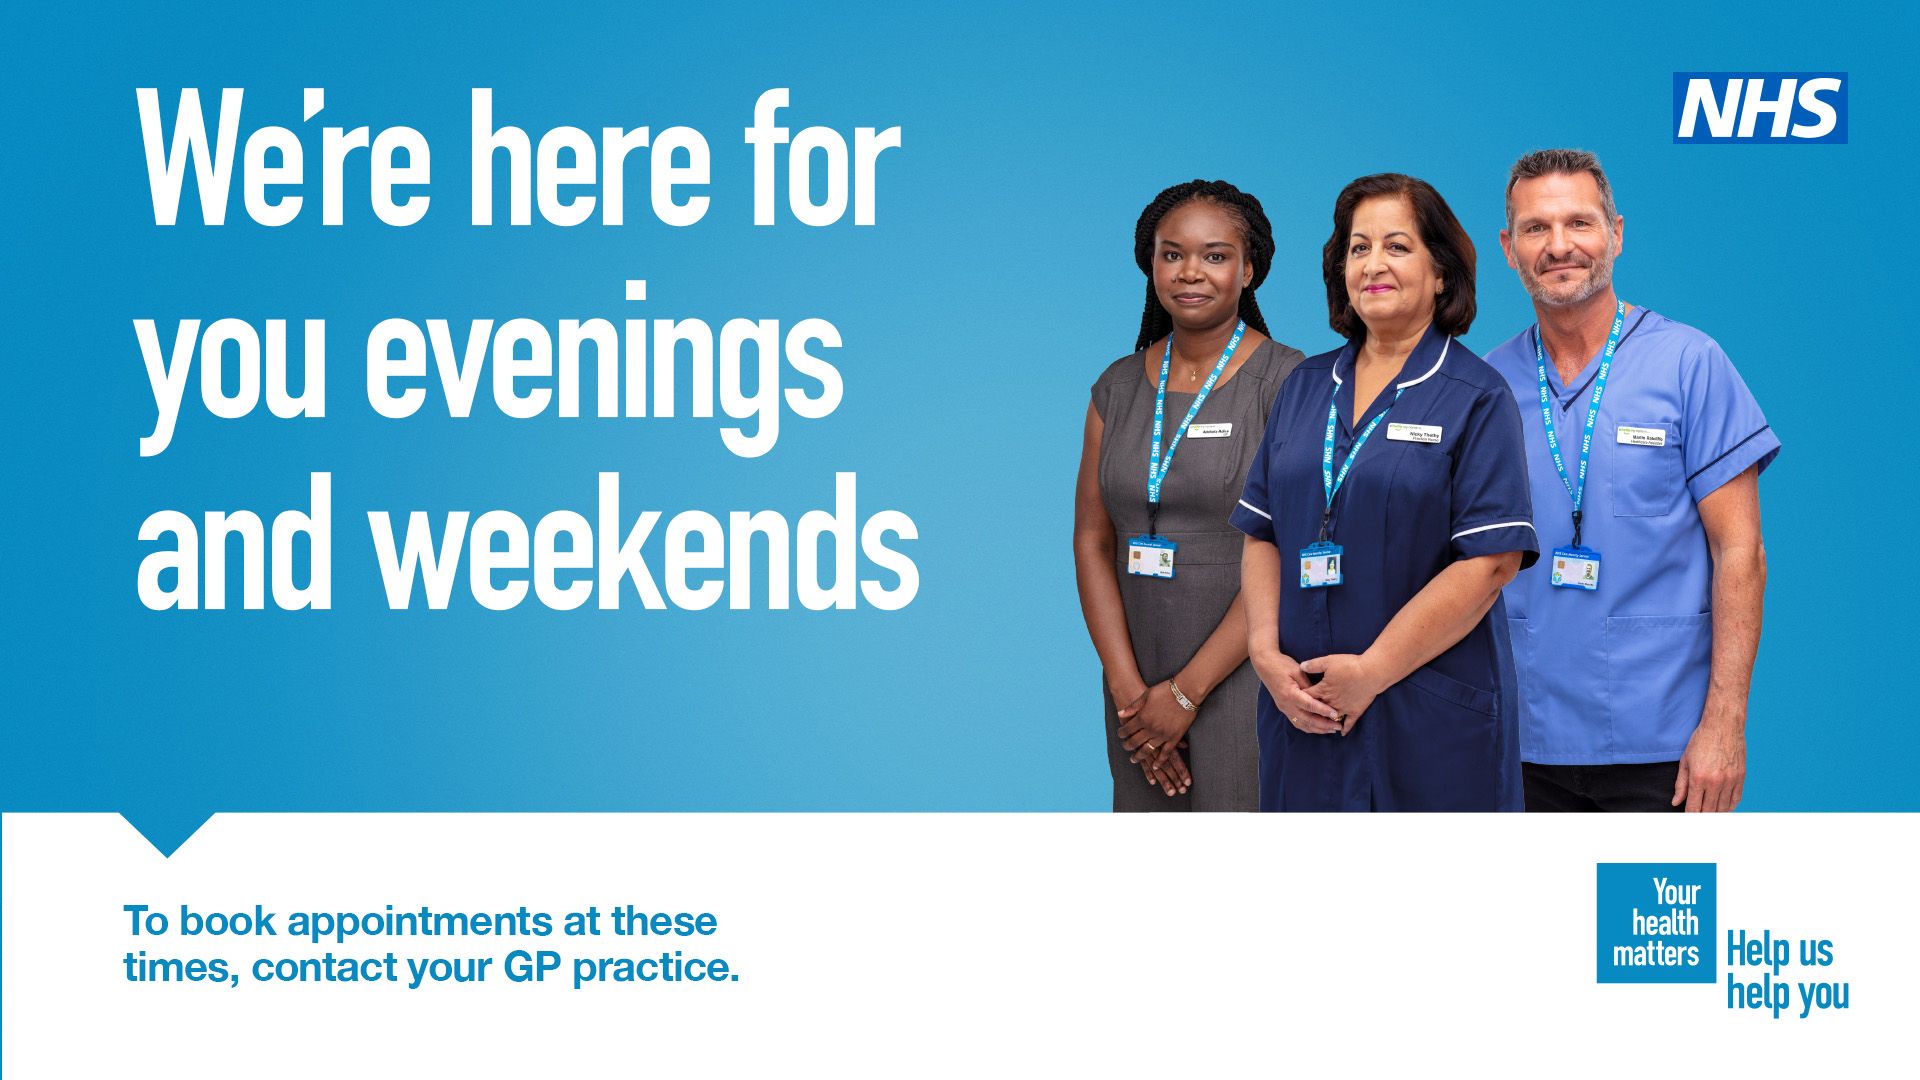 Picture of clinical staff with wording explaining there are GP appointments available on evenings and weekends